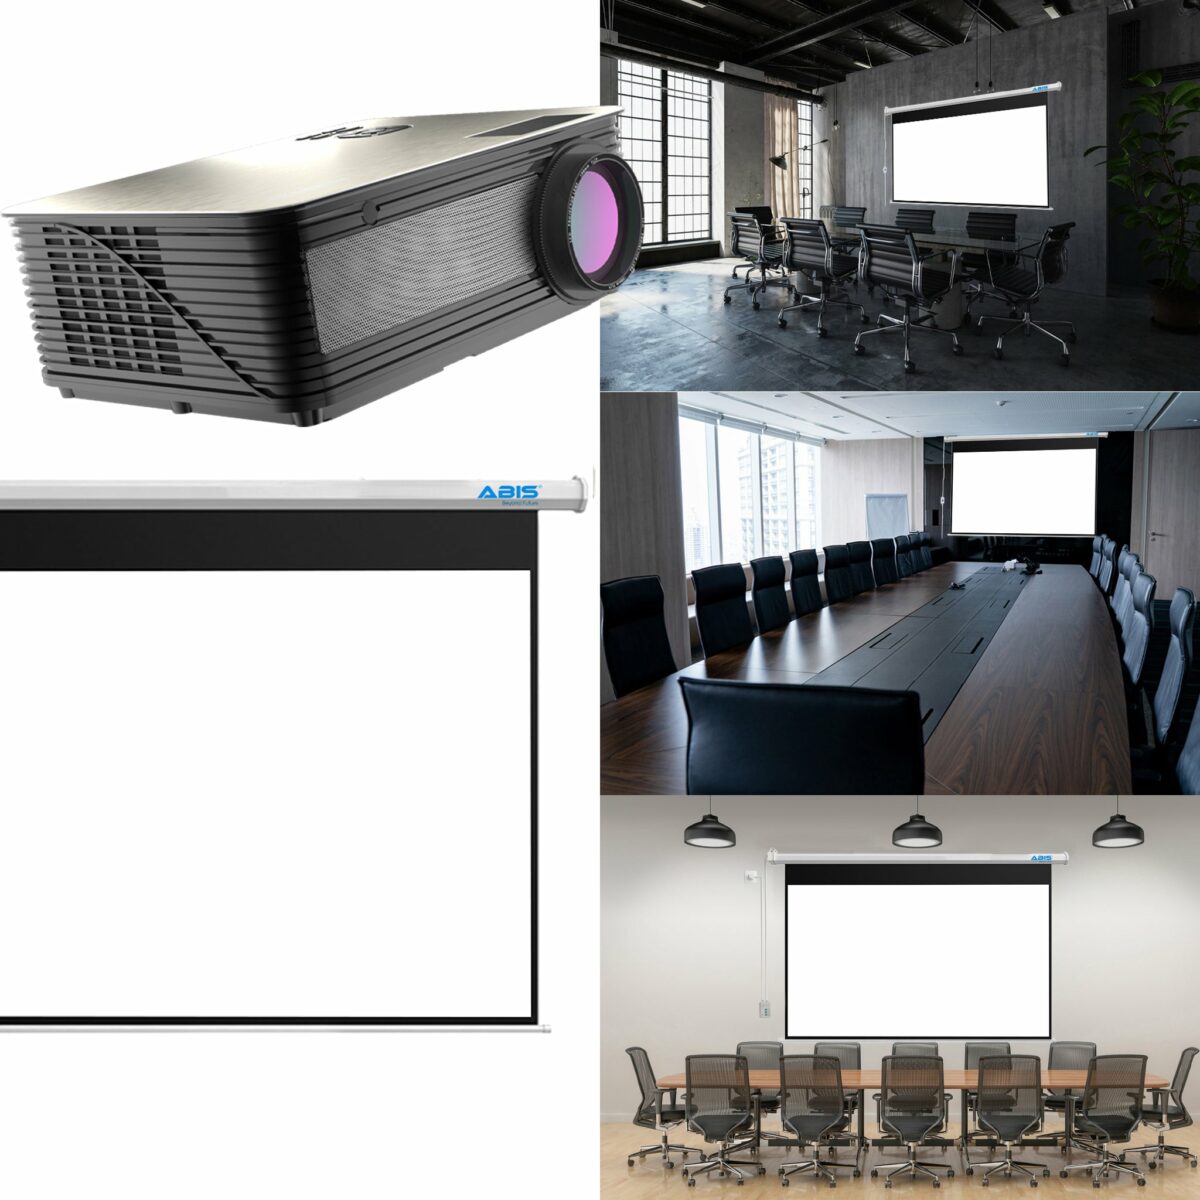 Electric Projector Screen 100 inches 16:9 Aspect Ratio 3D 4K - ABIS